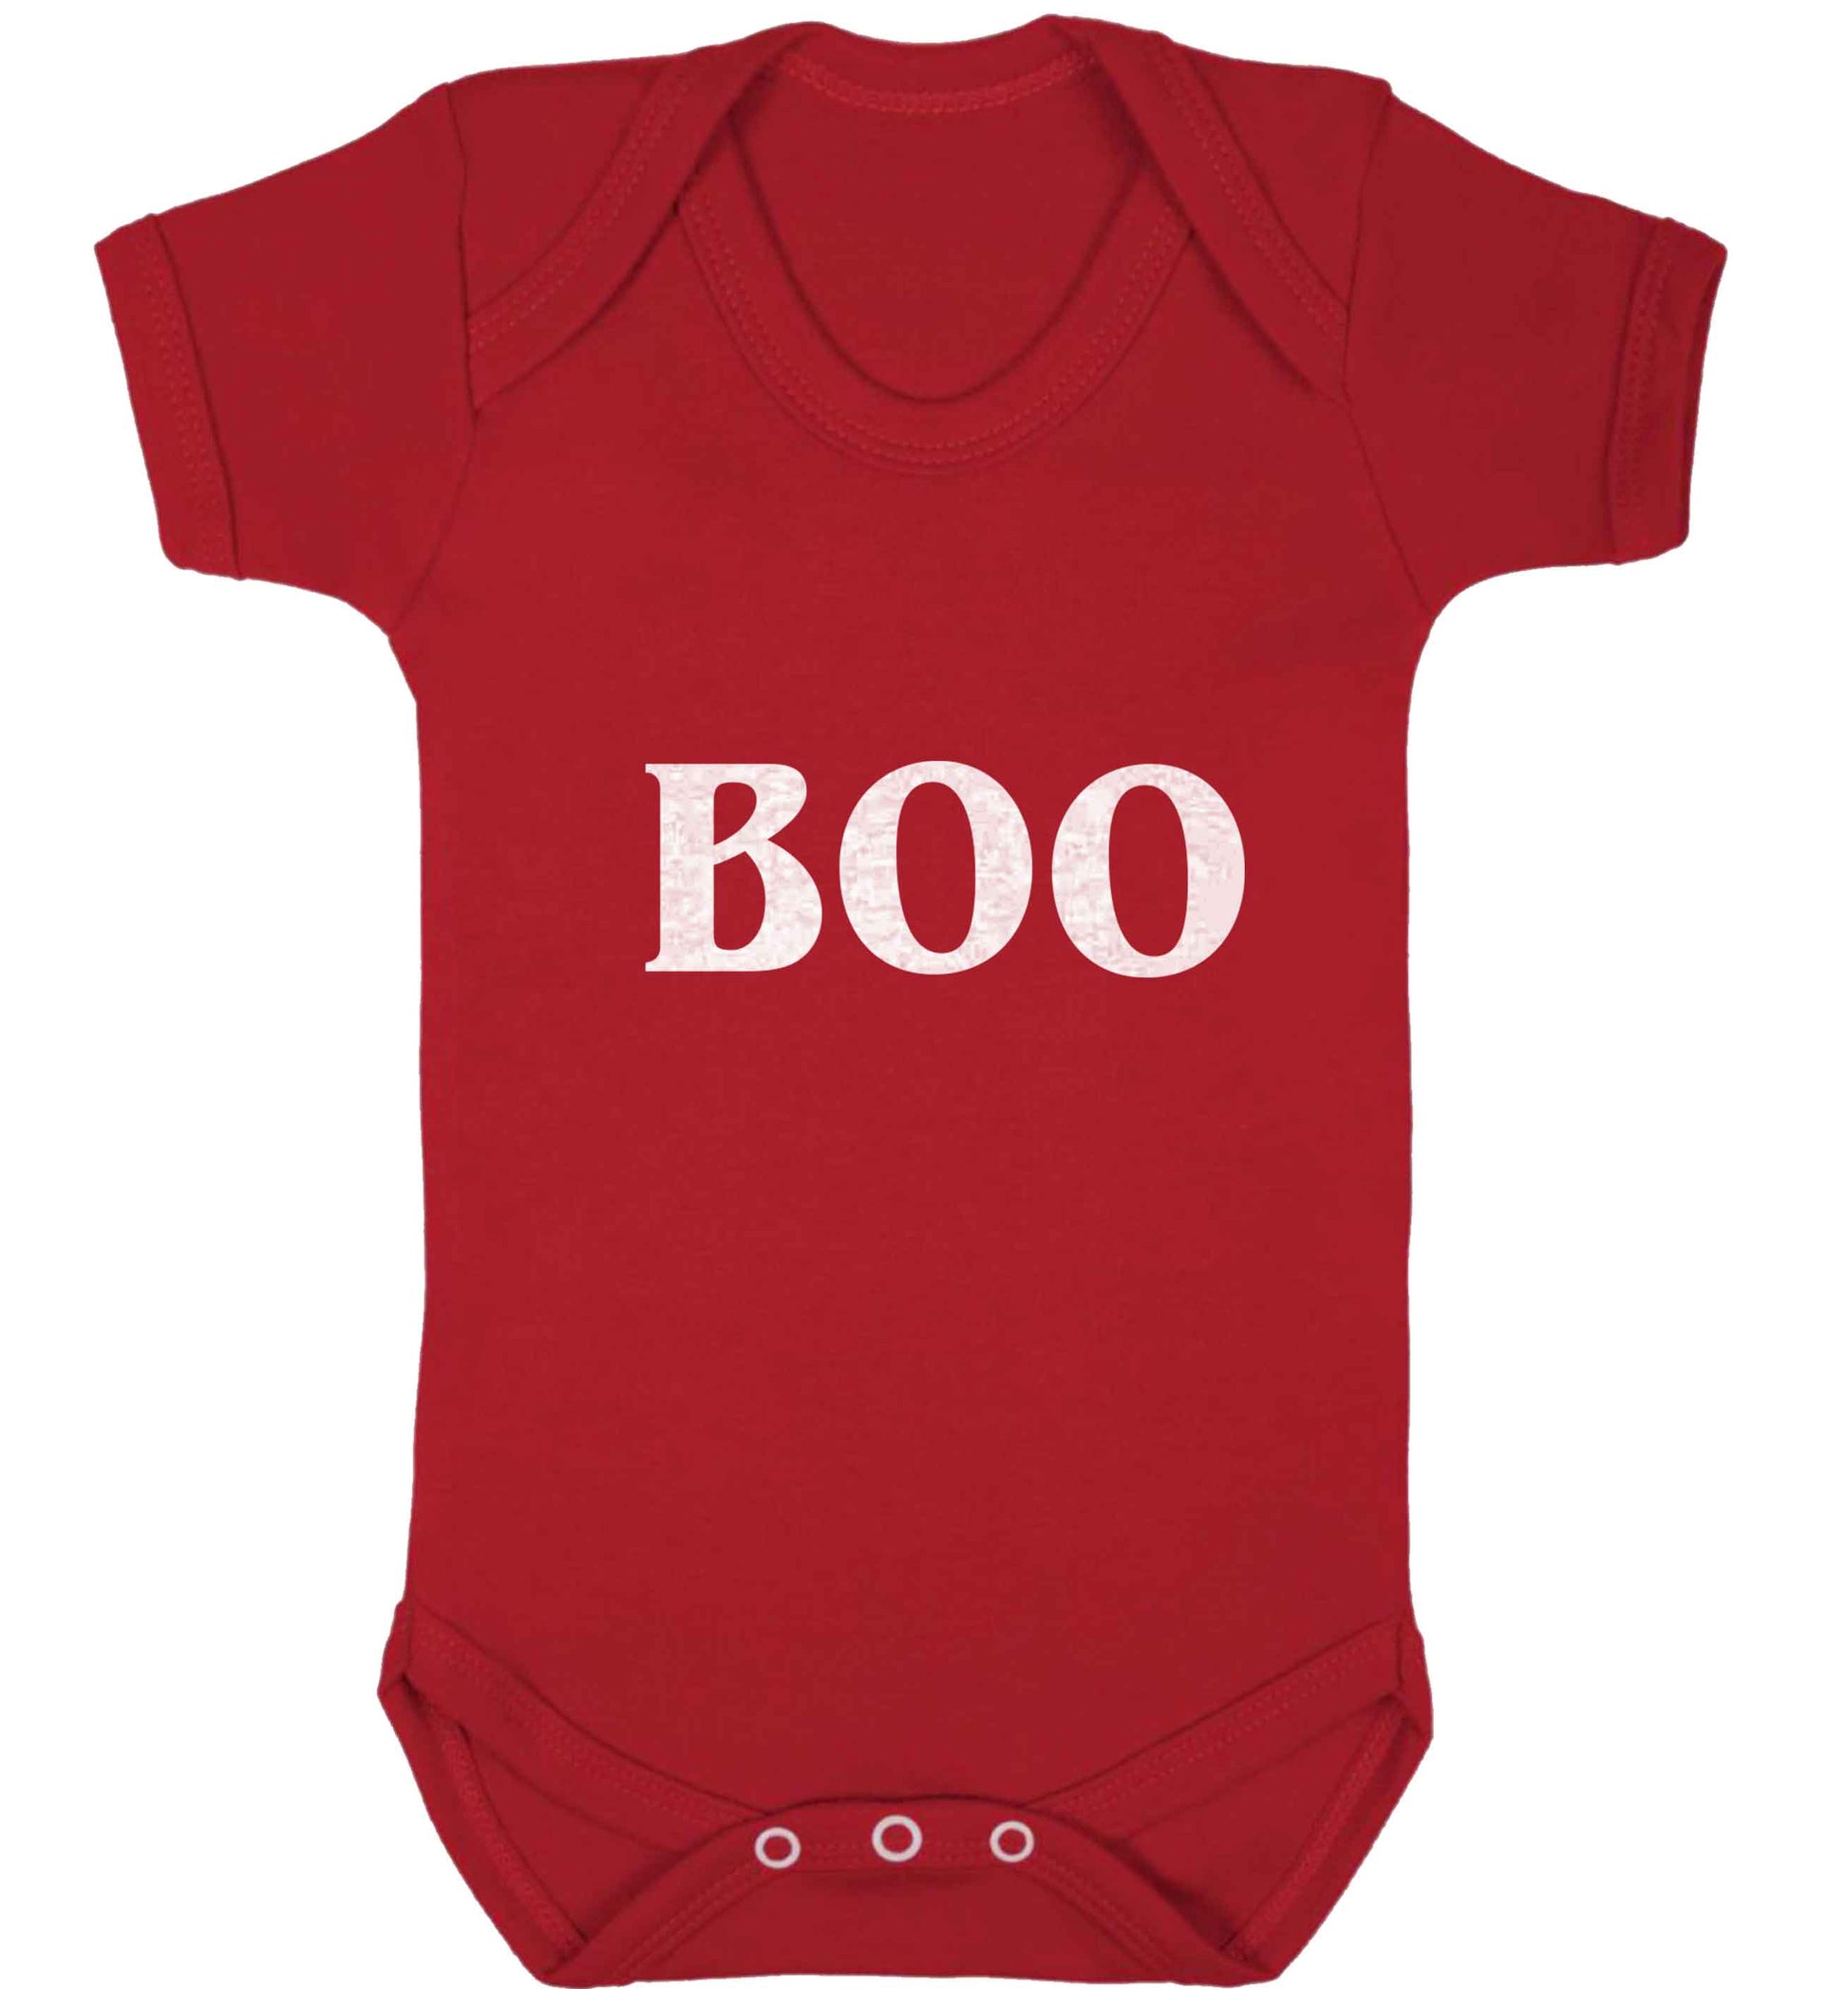 Boo baby vest red 18-24 months